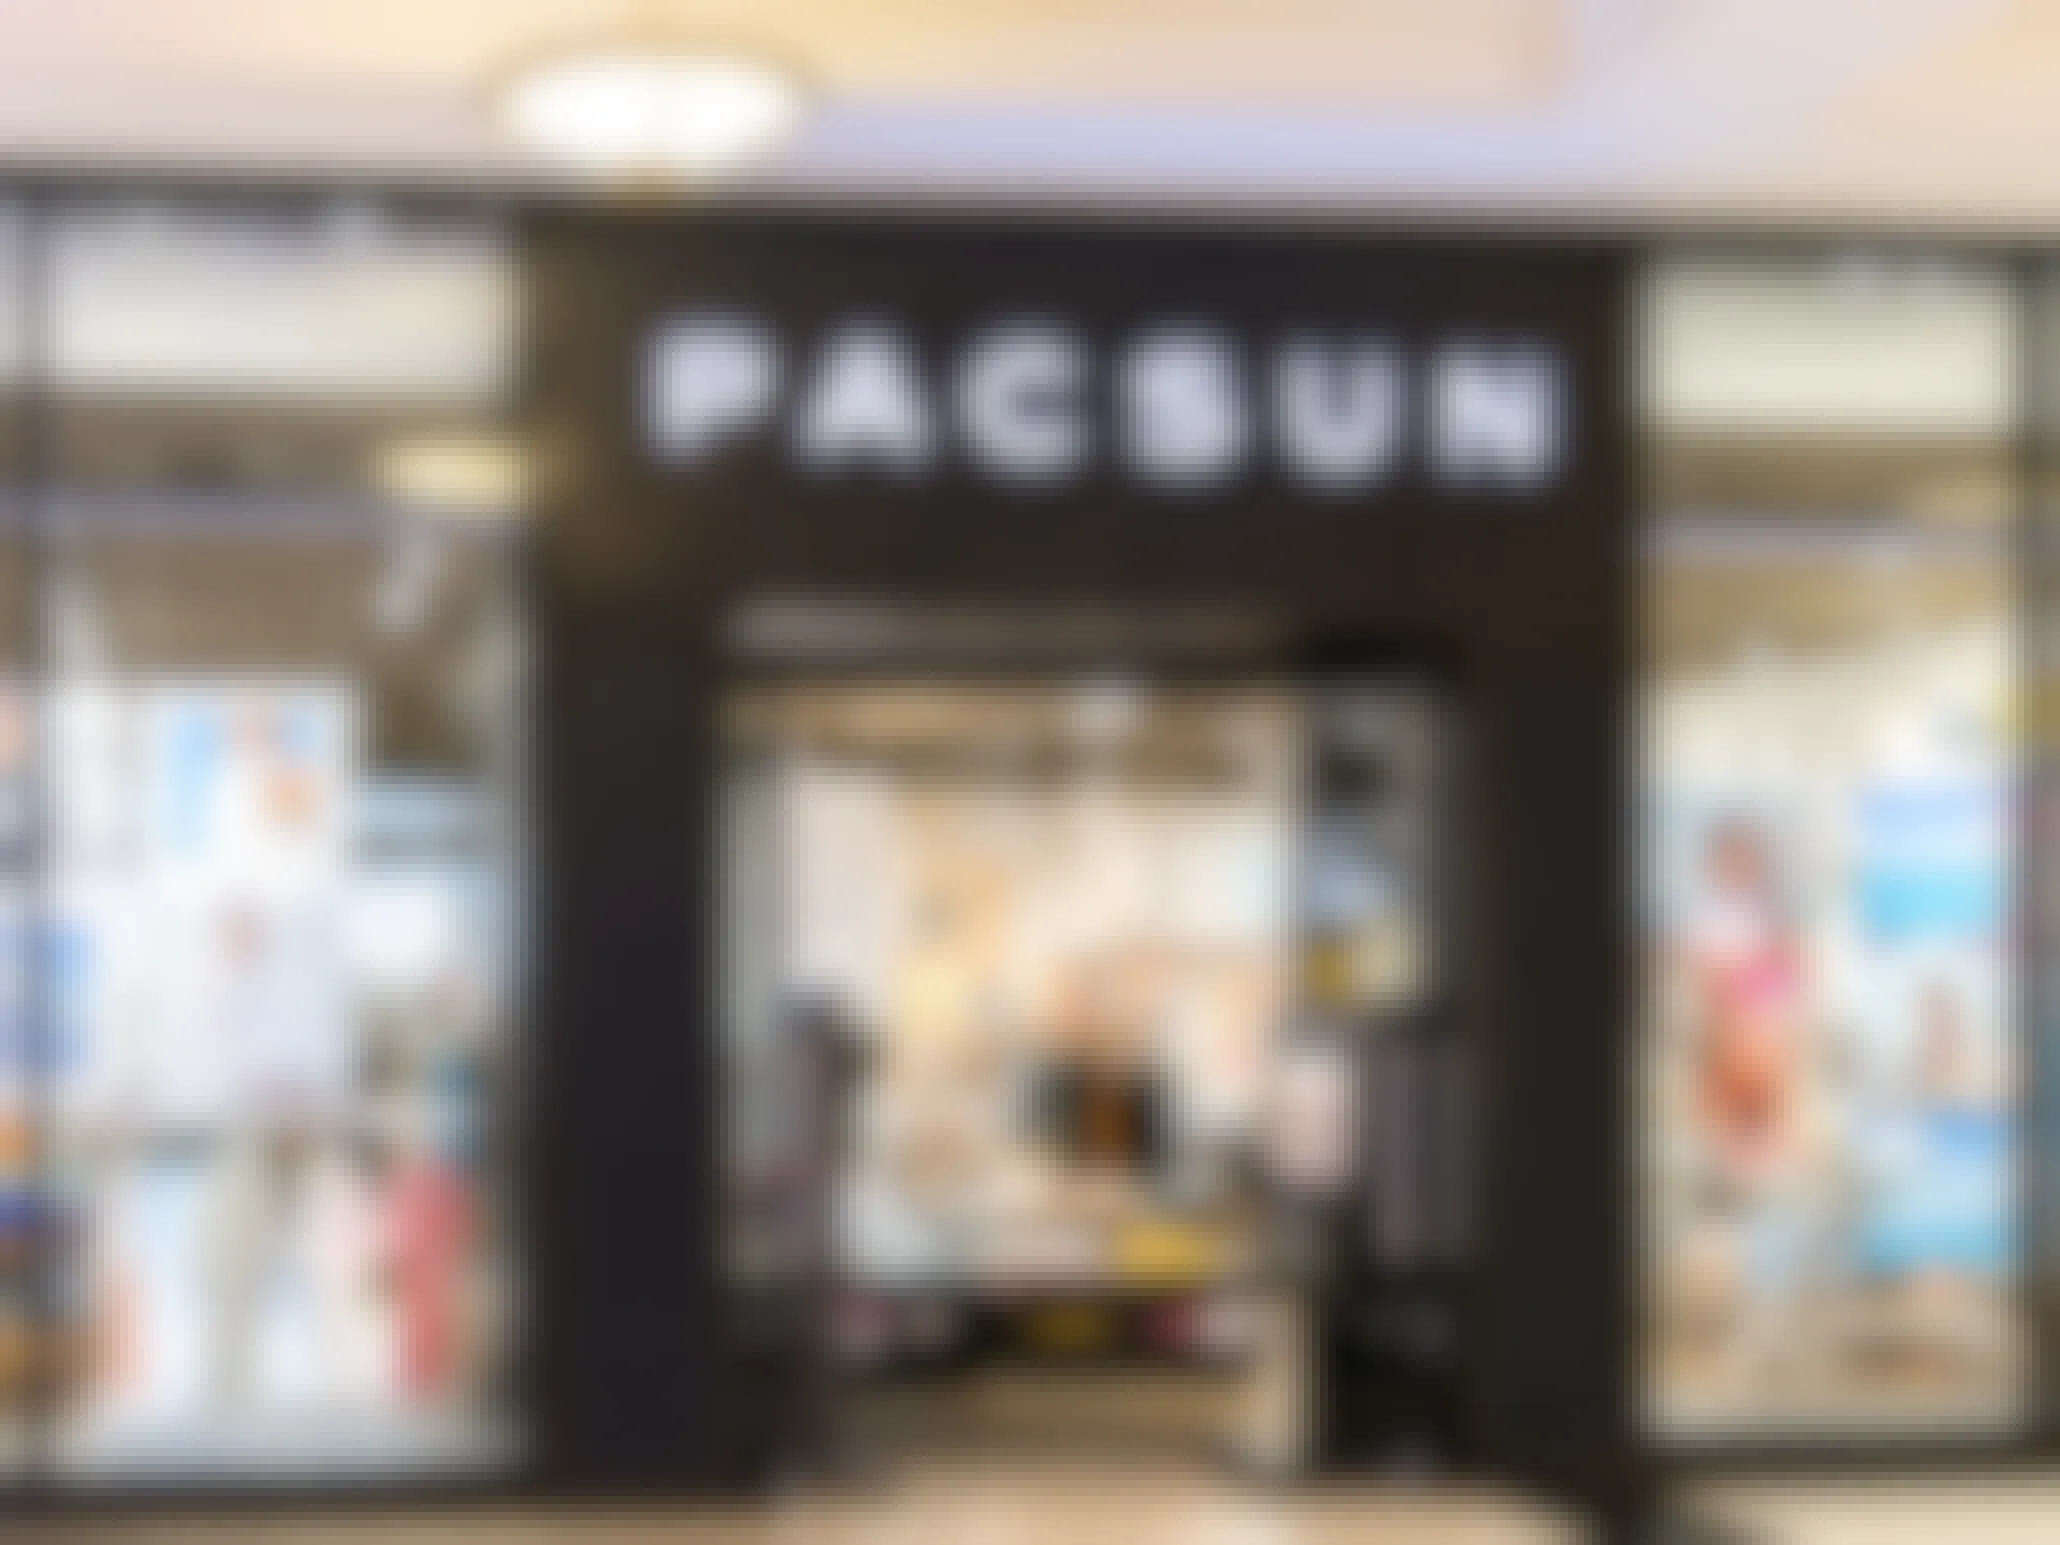 A PacSun store front in a mall